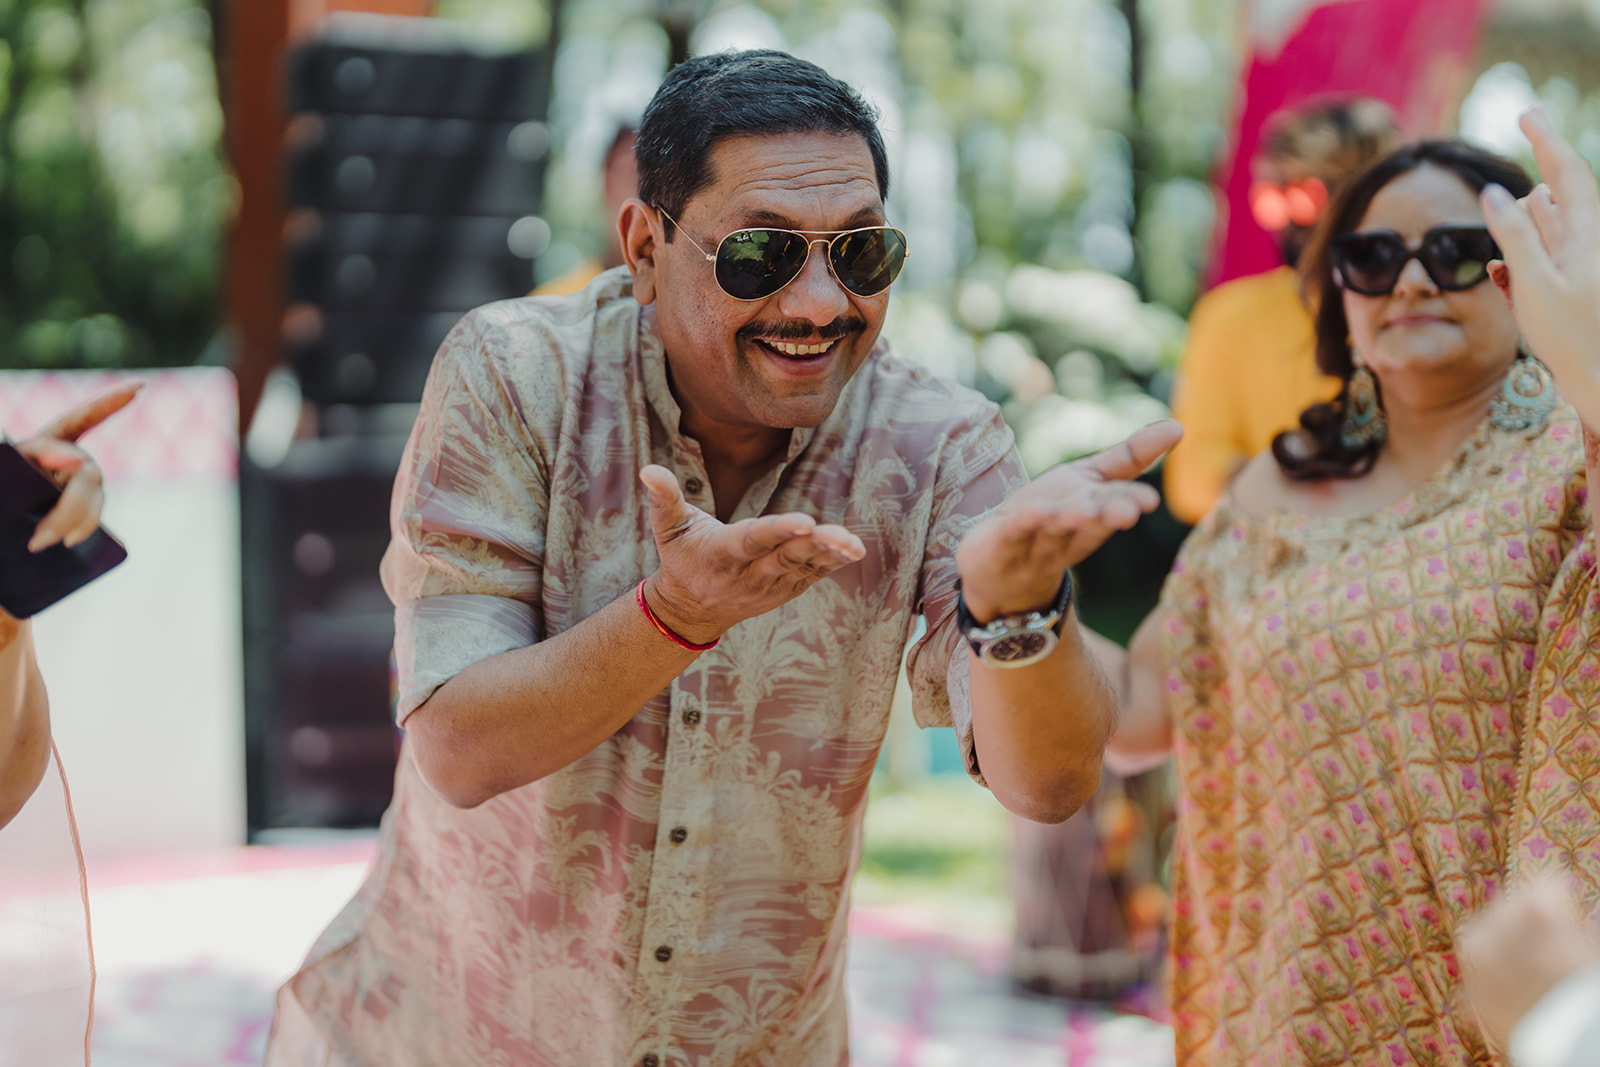 Celebration vibes: Guests savoring the moment with smiles and enthusiasm